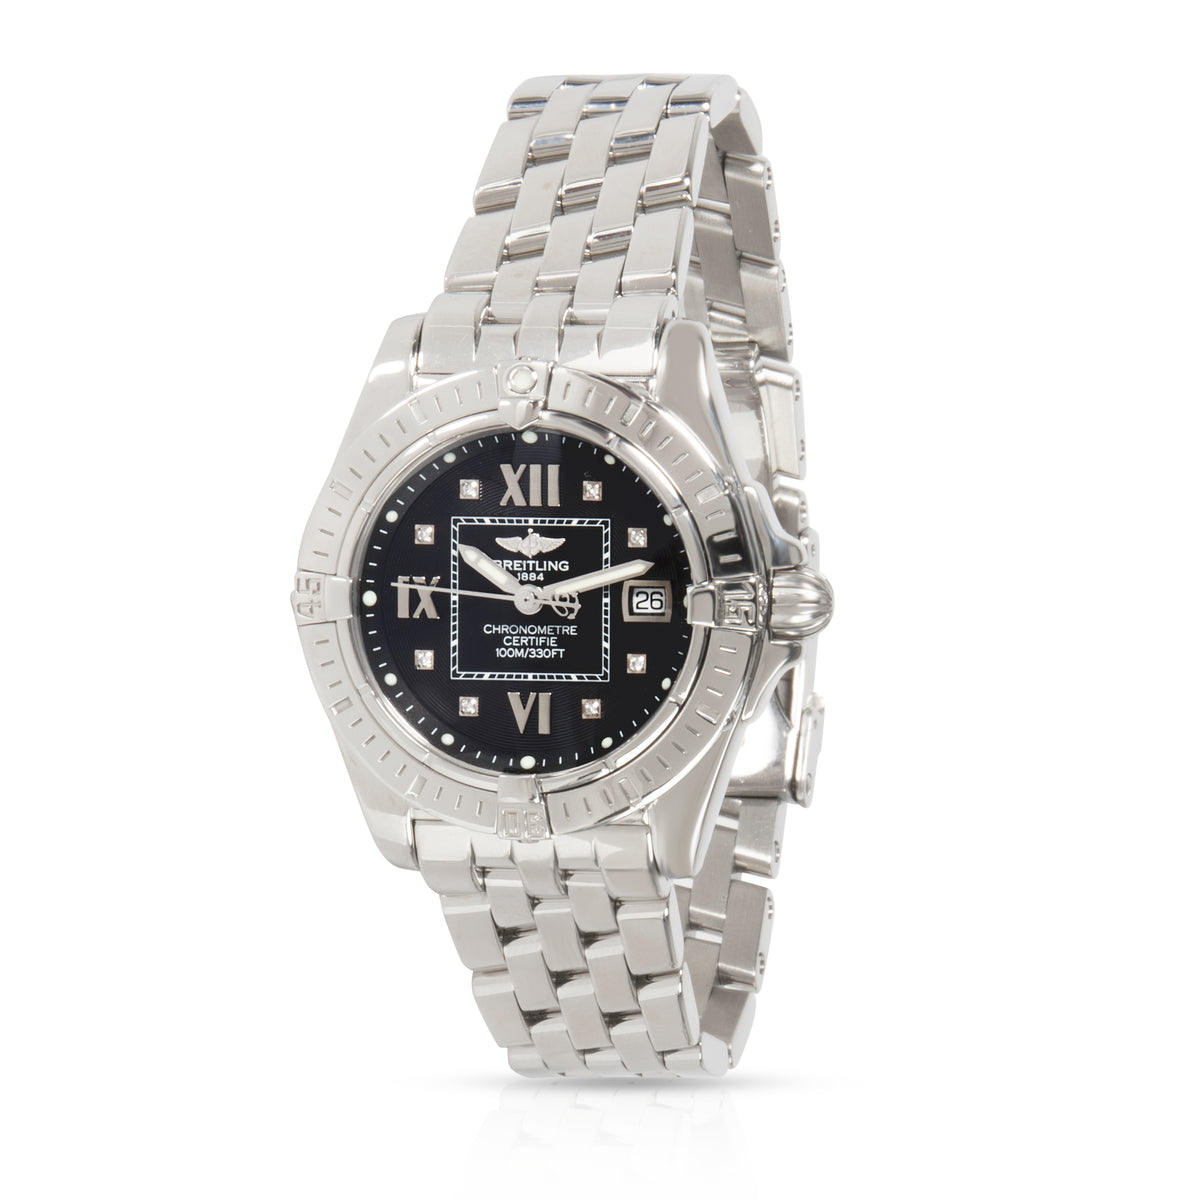 Breitling Galactic 32 A71356 Women's Watch in  Stainless Steel